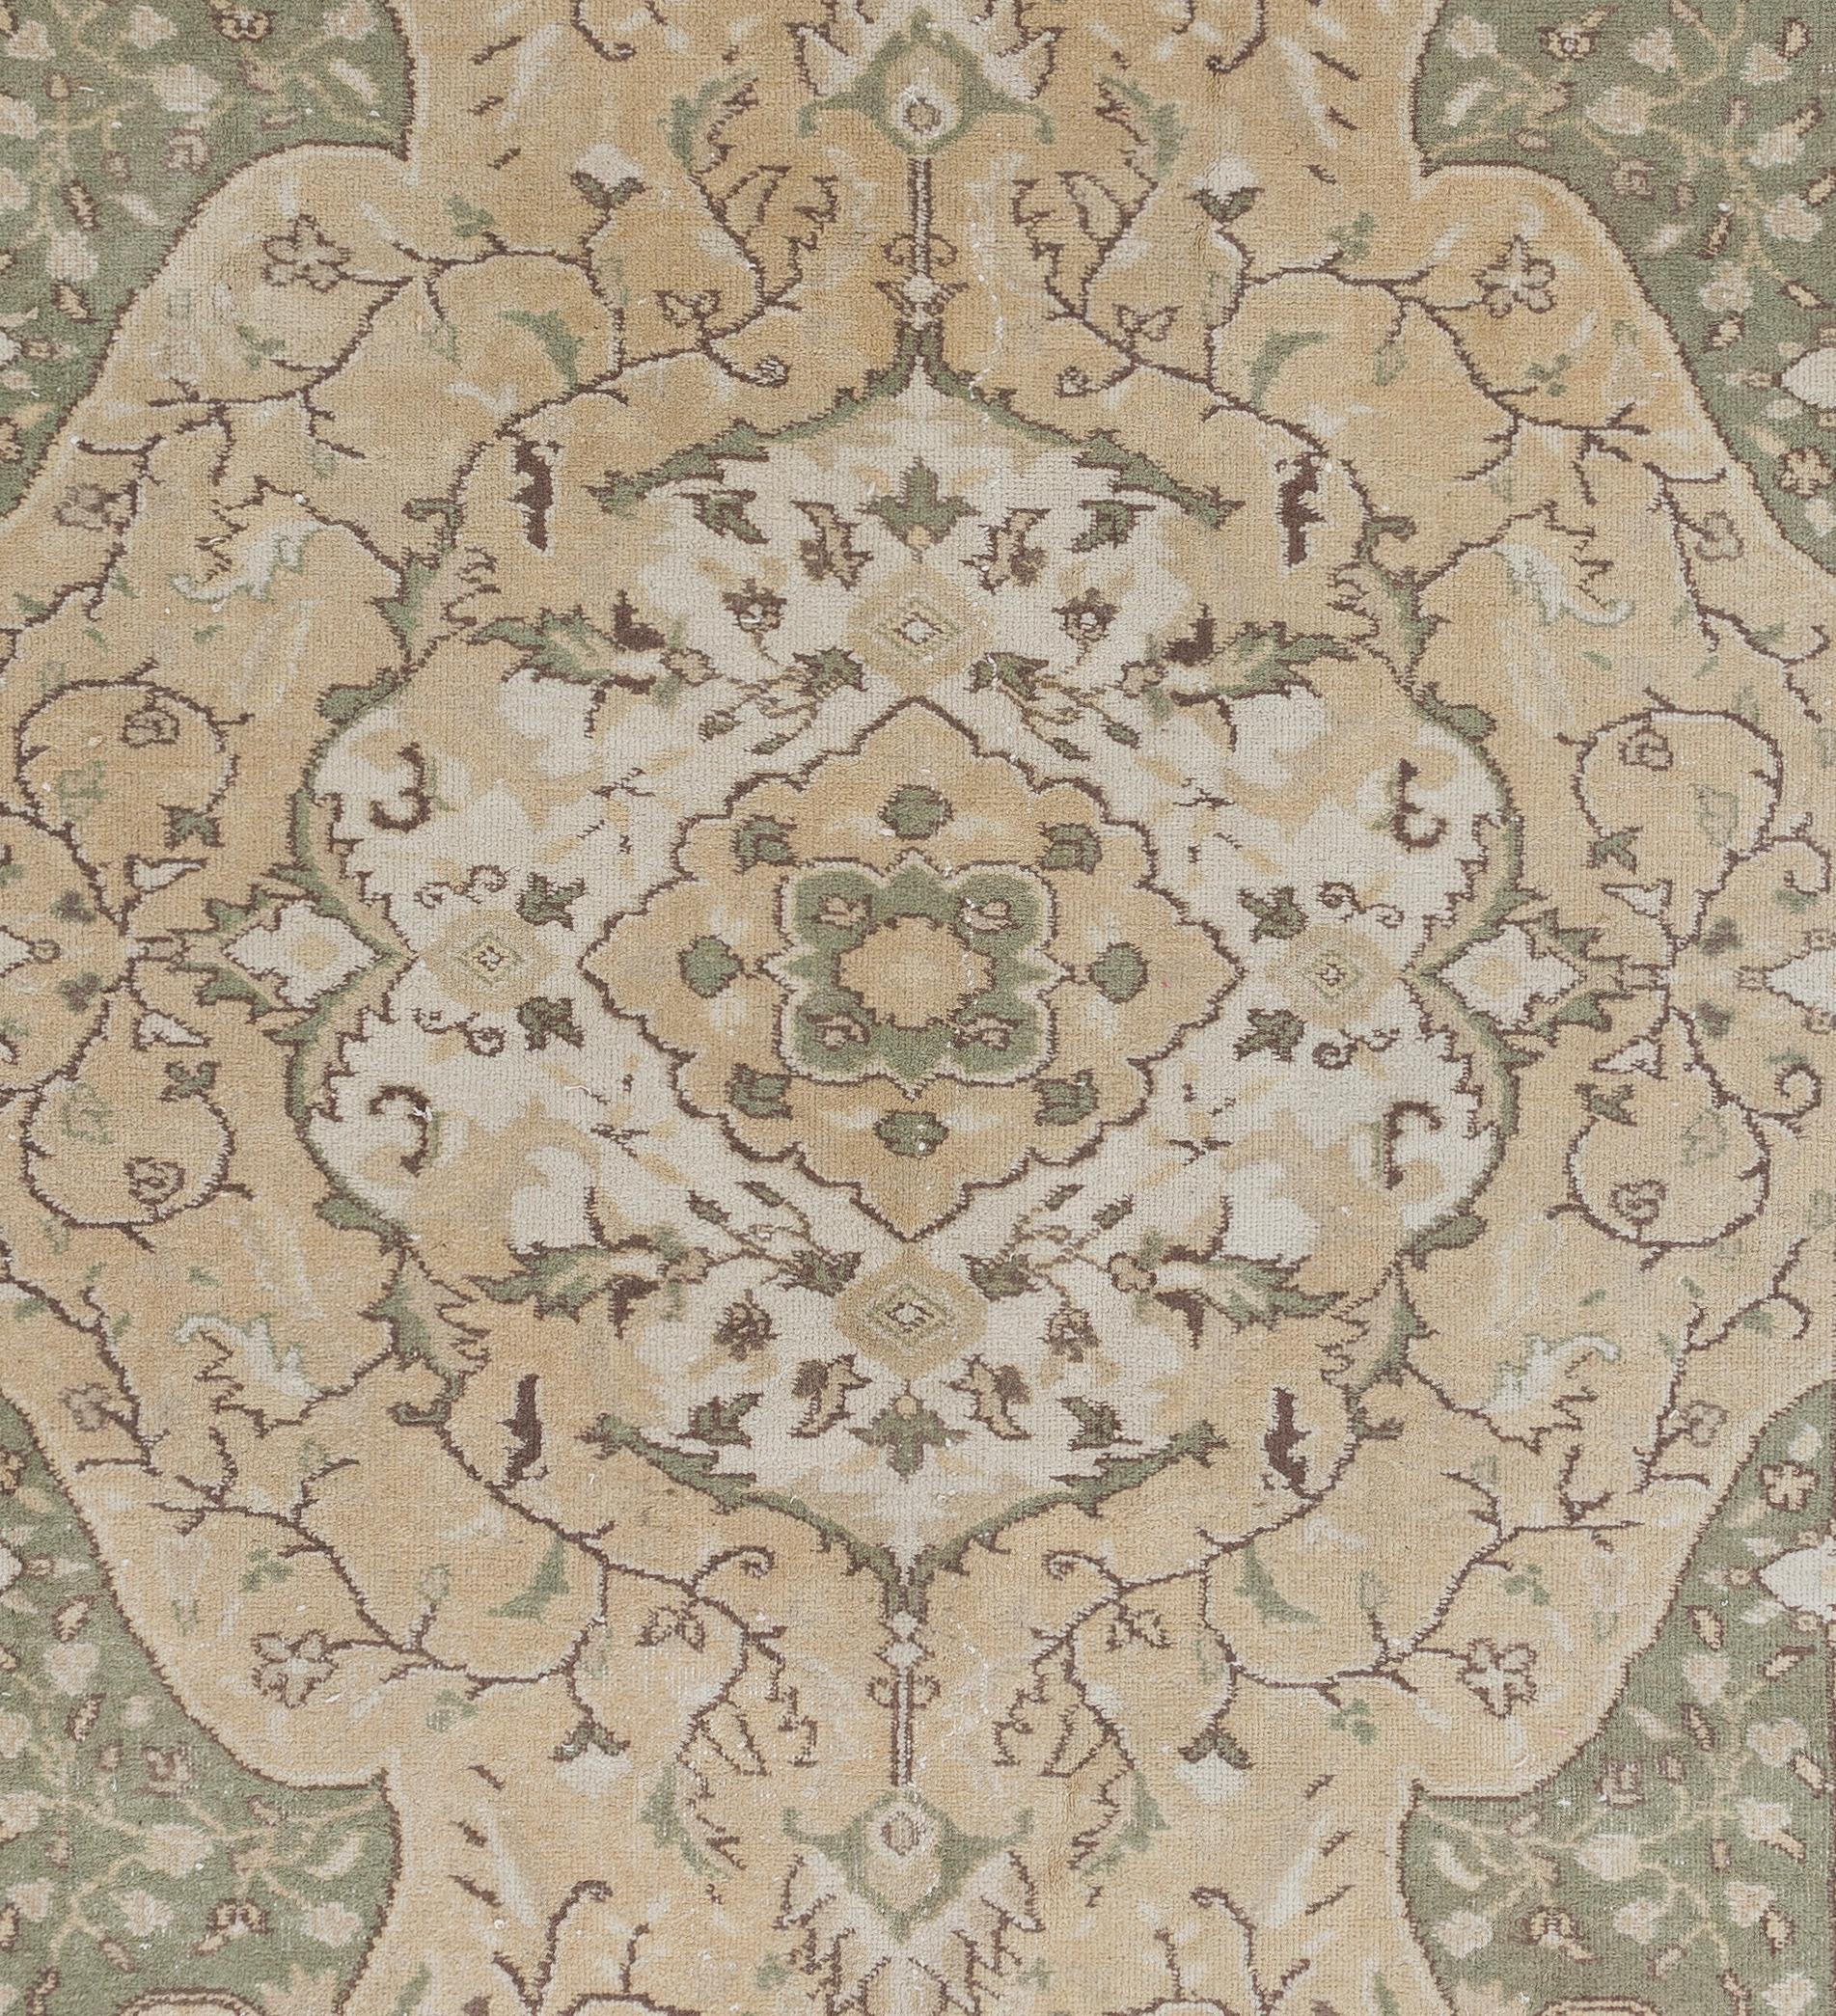 Wool 6.4x10 Ft Vintage Hand-Knotted Oushak Area Rug in Beige & Green For Sale